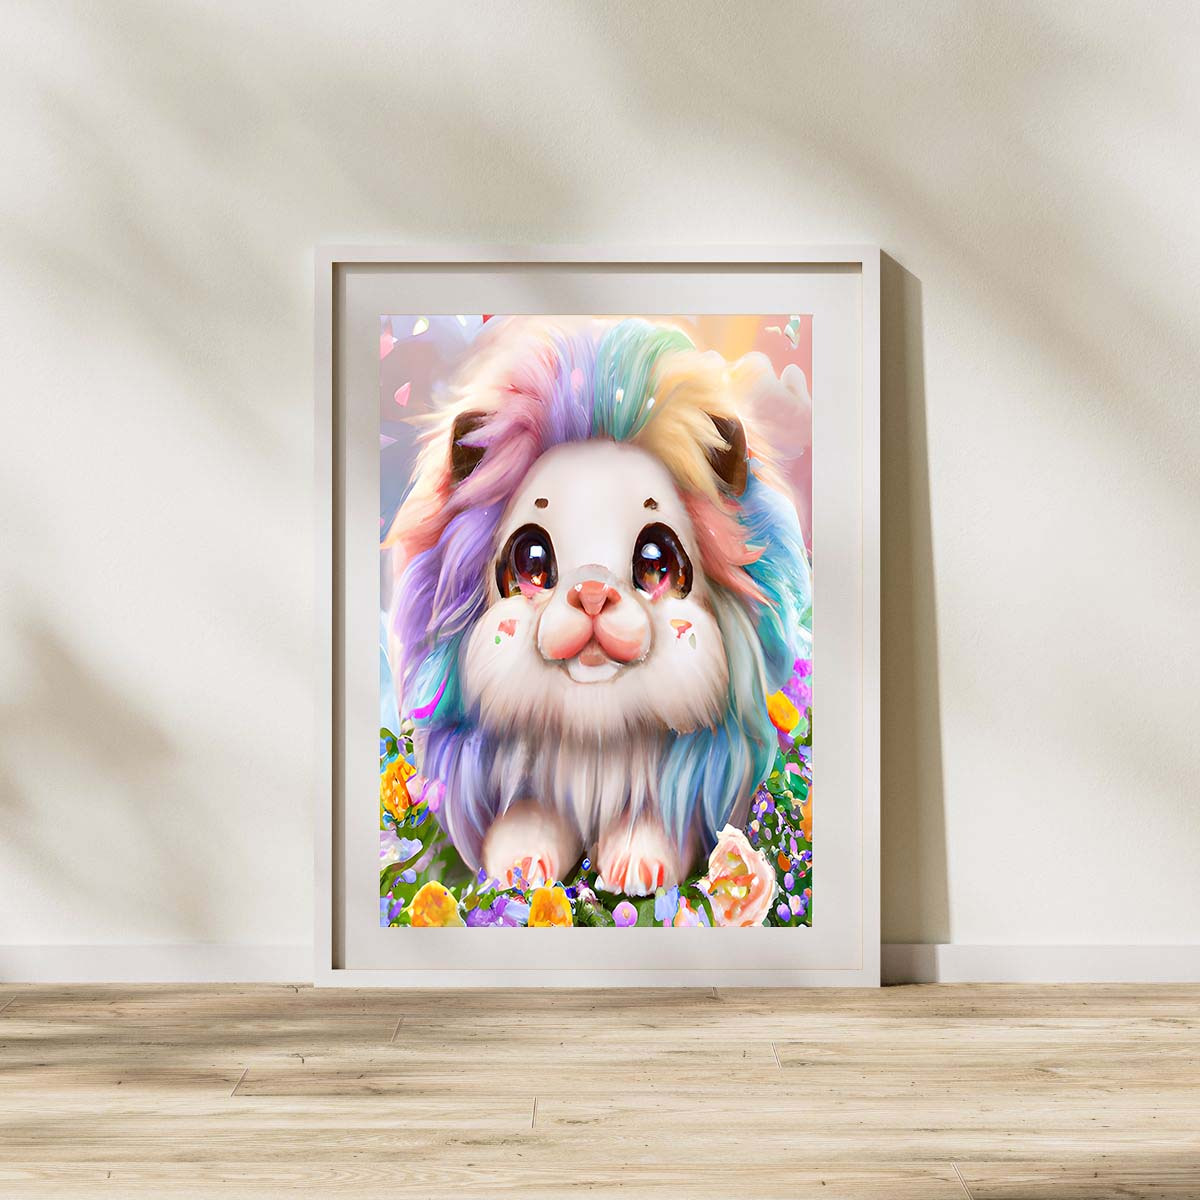 Cute Animal Diamond Painting Kits Bison With A Lions Mane 5d - Temu